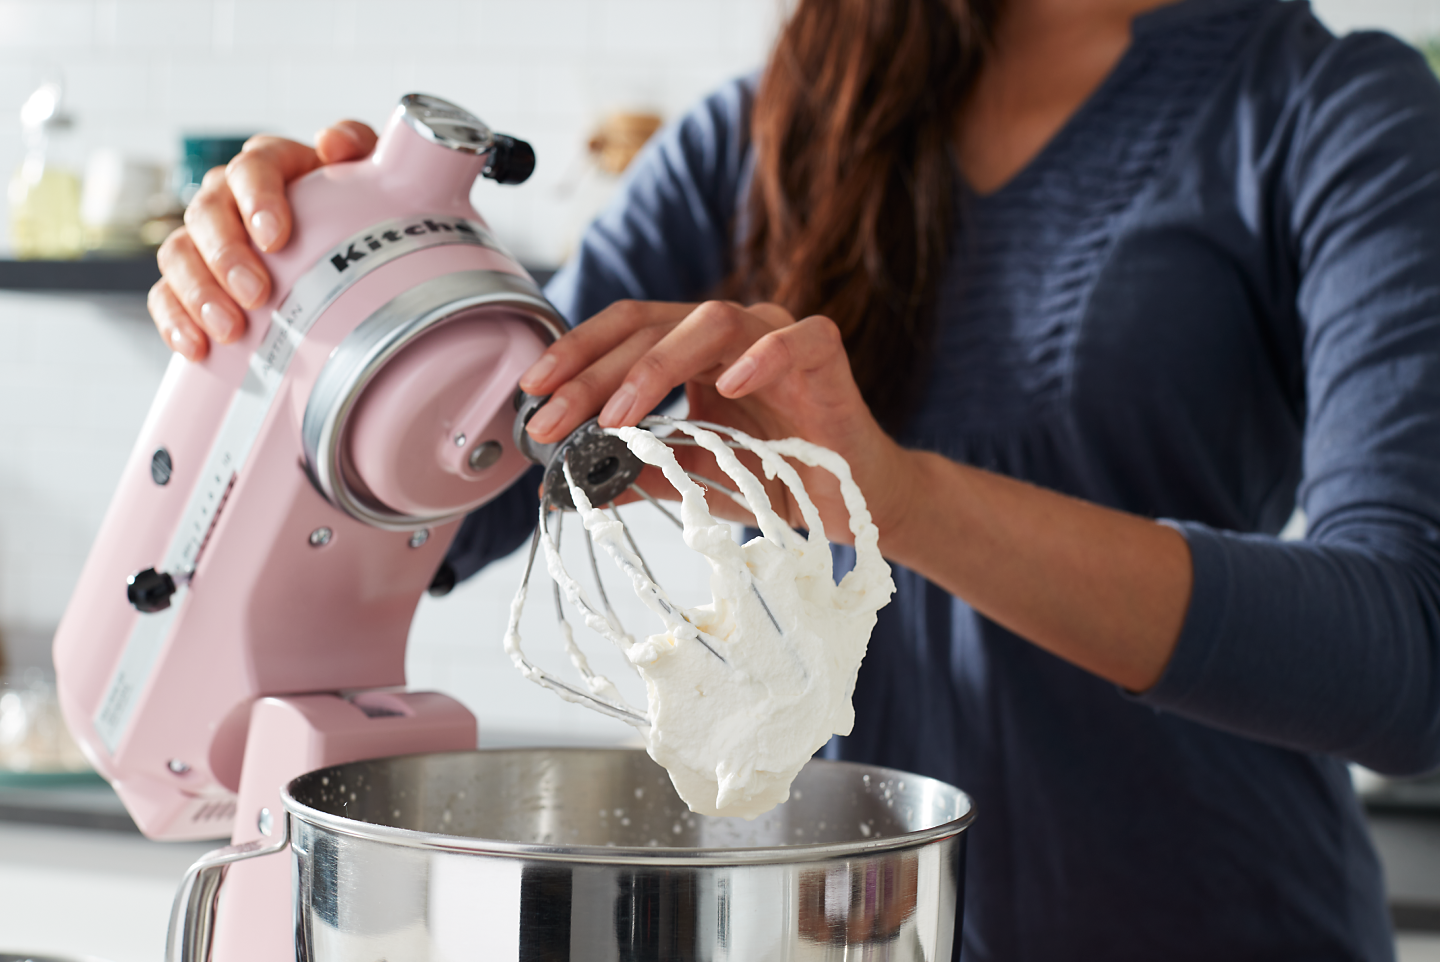 The 10 Best KitchenAid Mixer Attachments of 2022